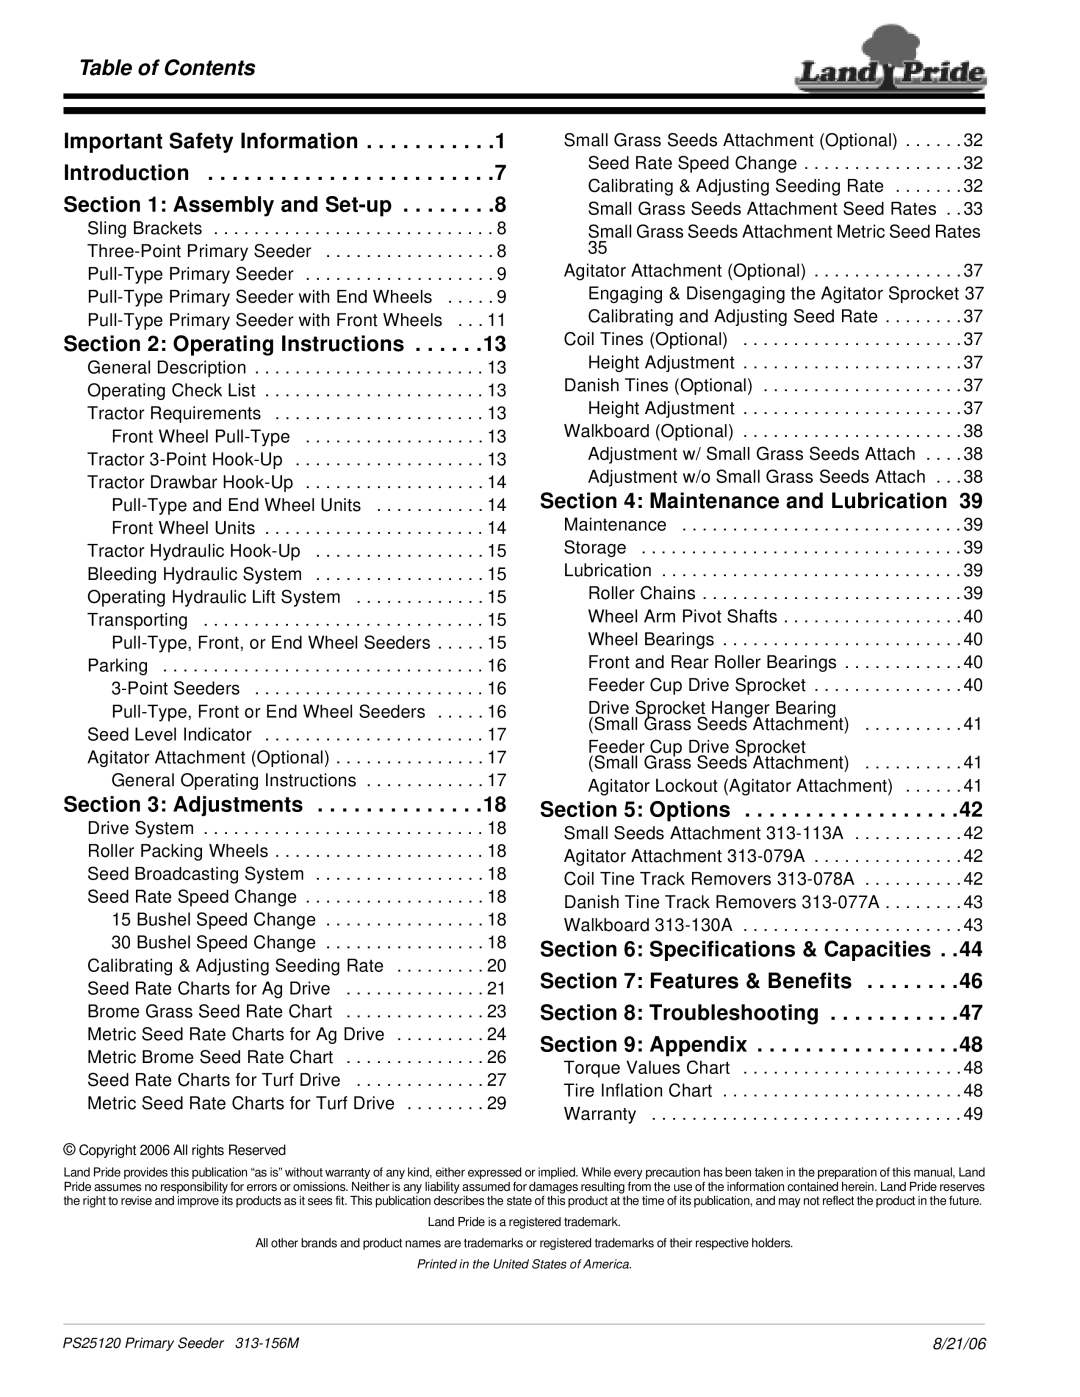 Land Pride PS25120 manual Table of Contents, Important Safety Information, Assembly and Set-up, Operating Instructions 